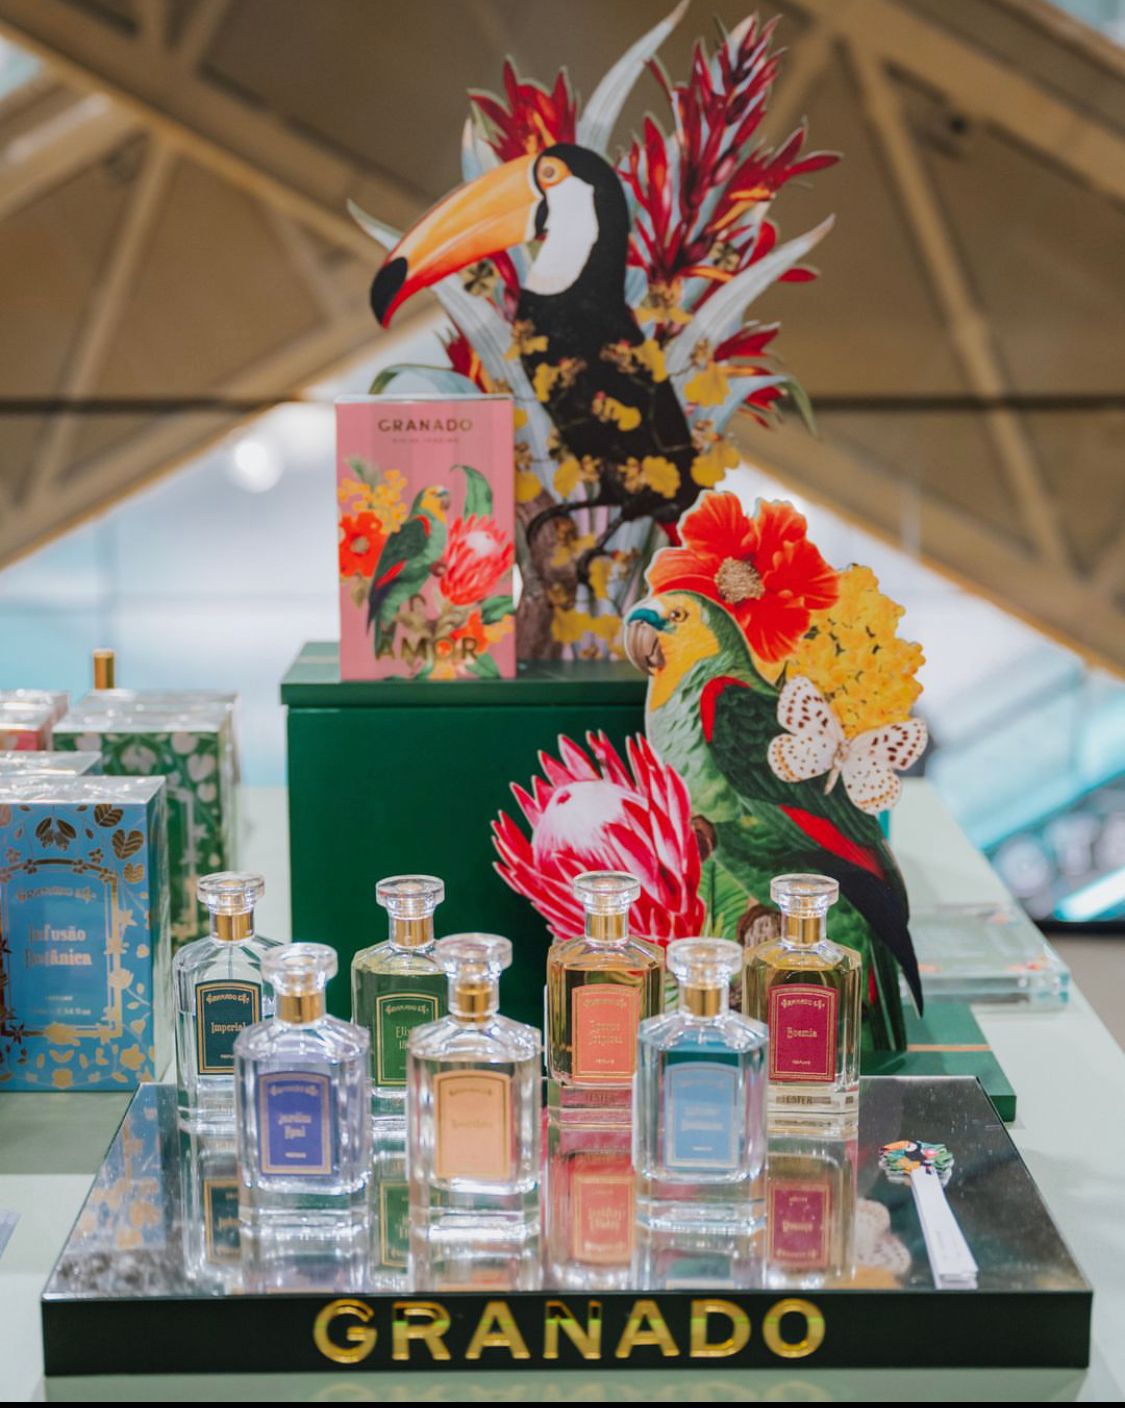 From underdogs to cult favorites: The rise of niche fragrances in